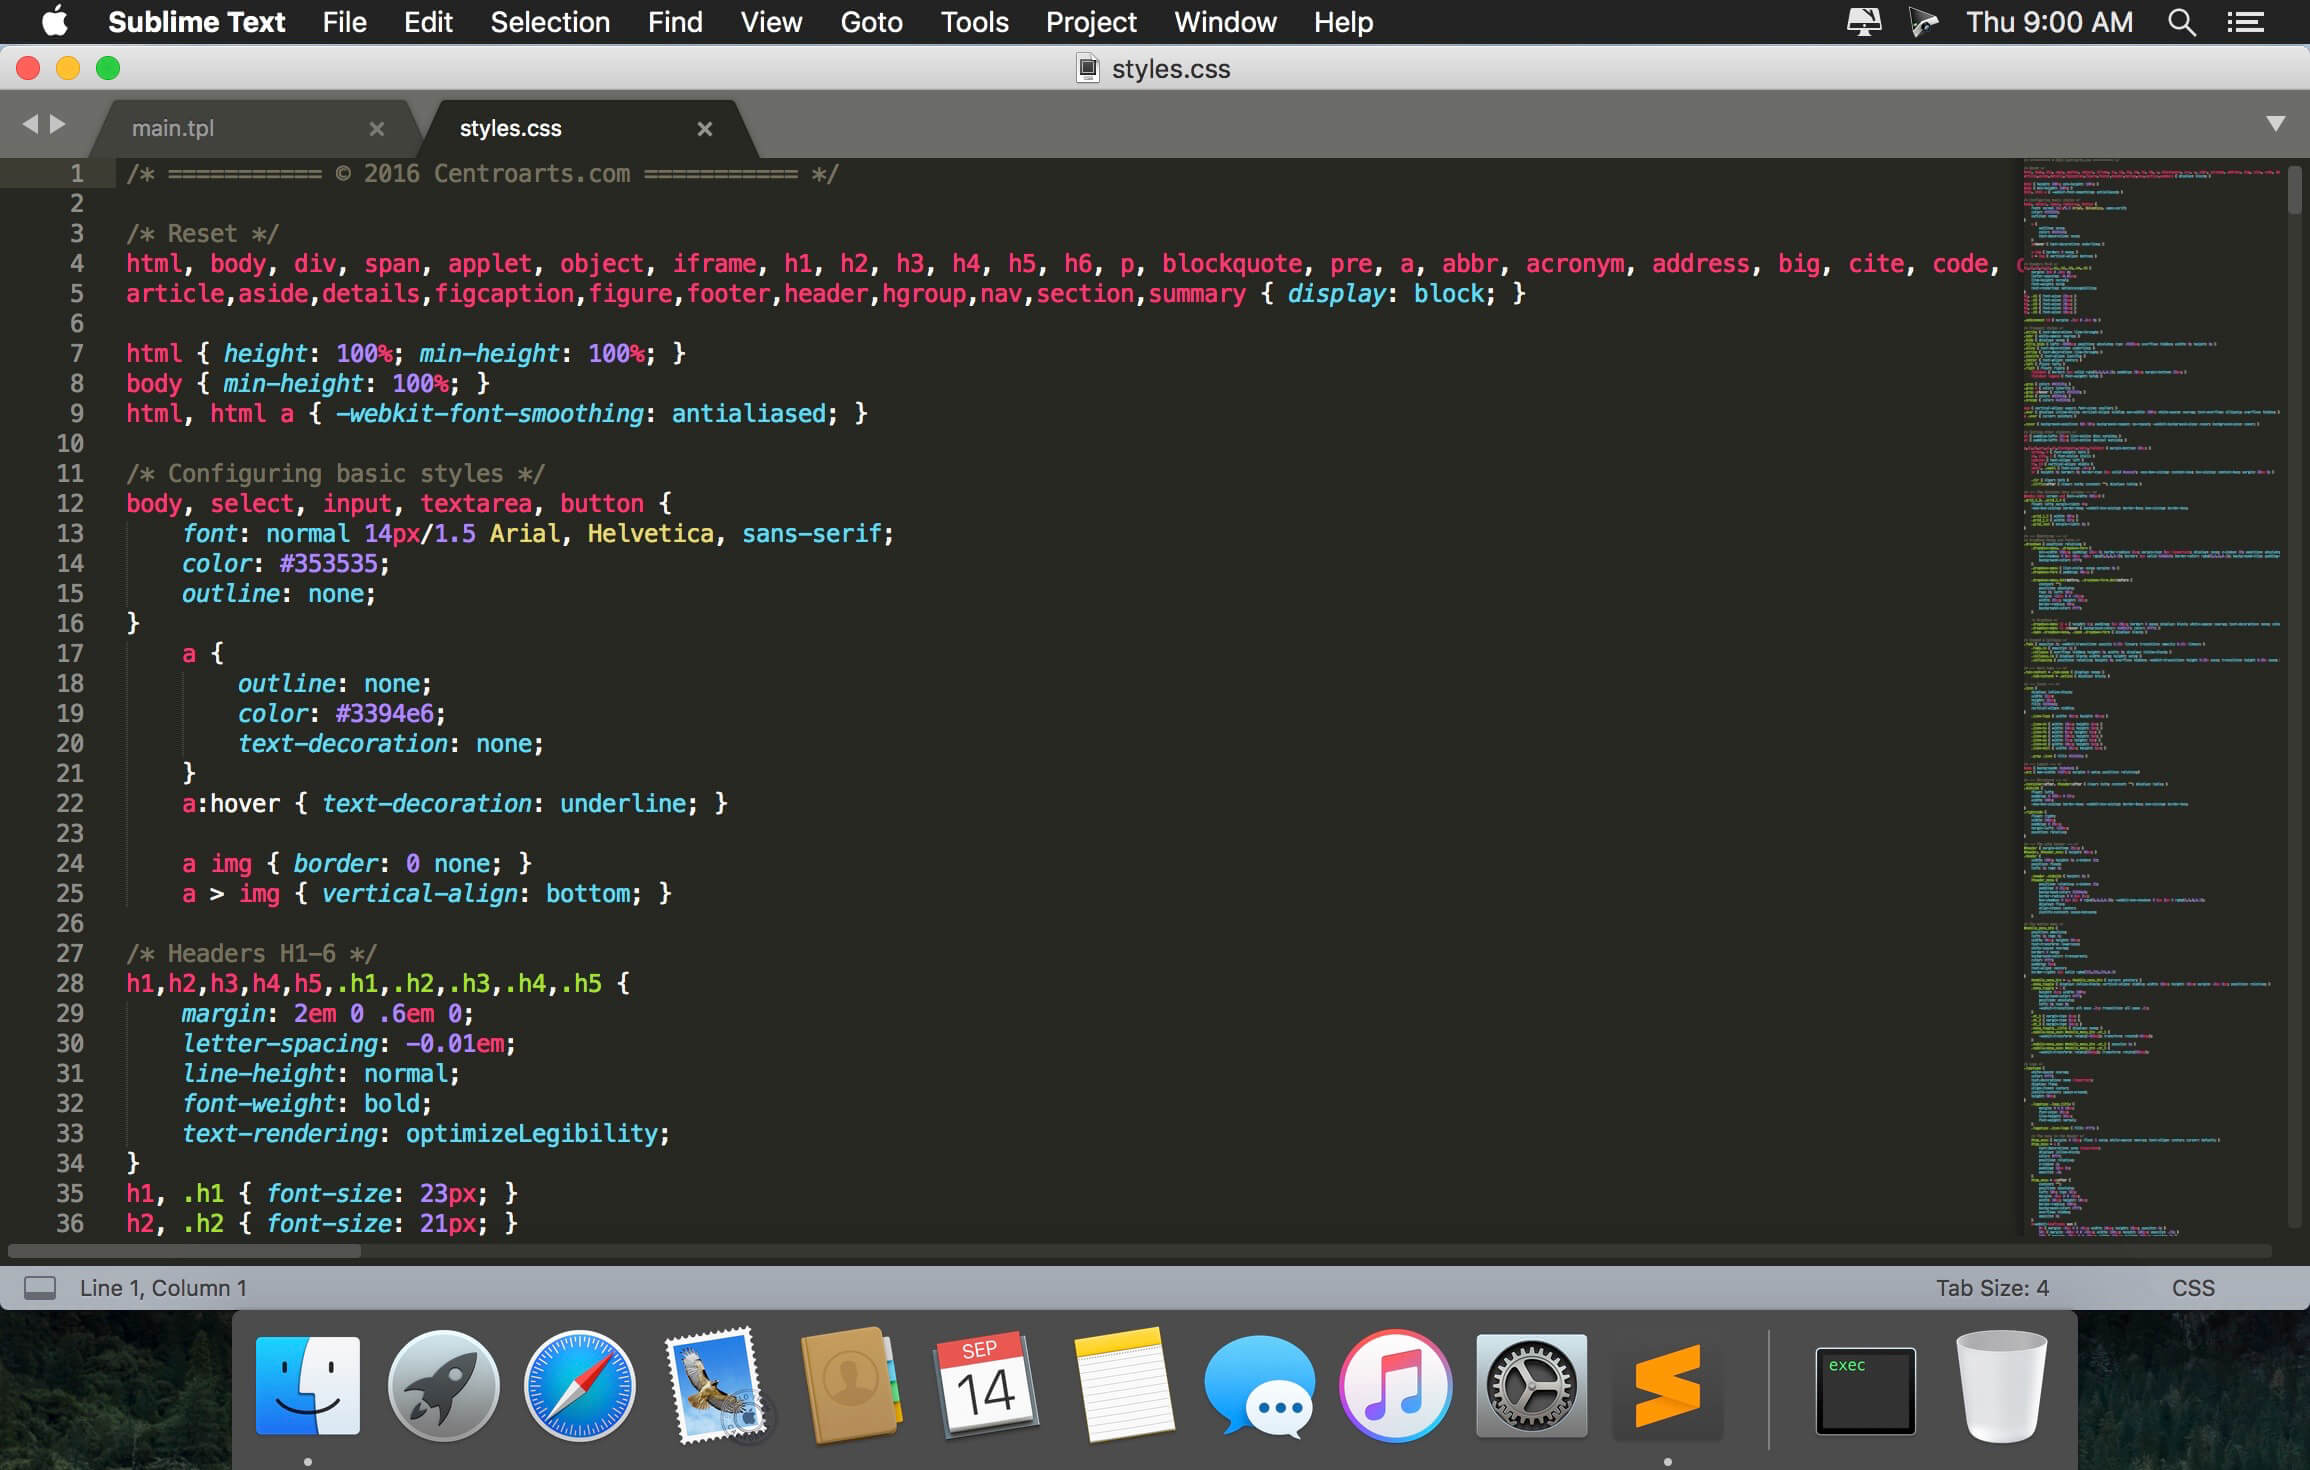 sublime text 3 crack download for windows